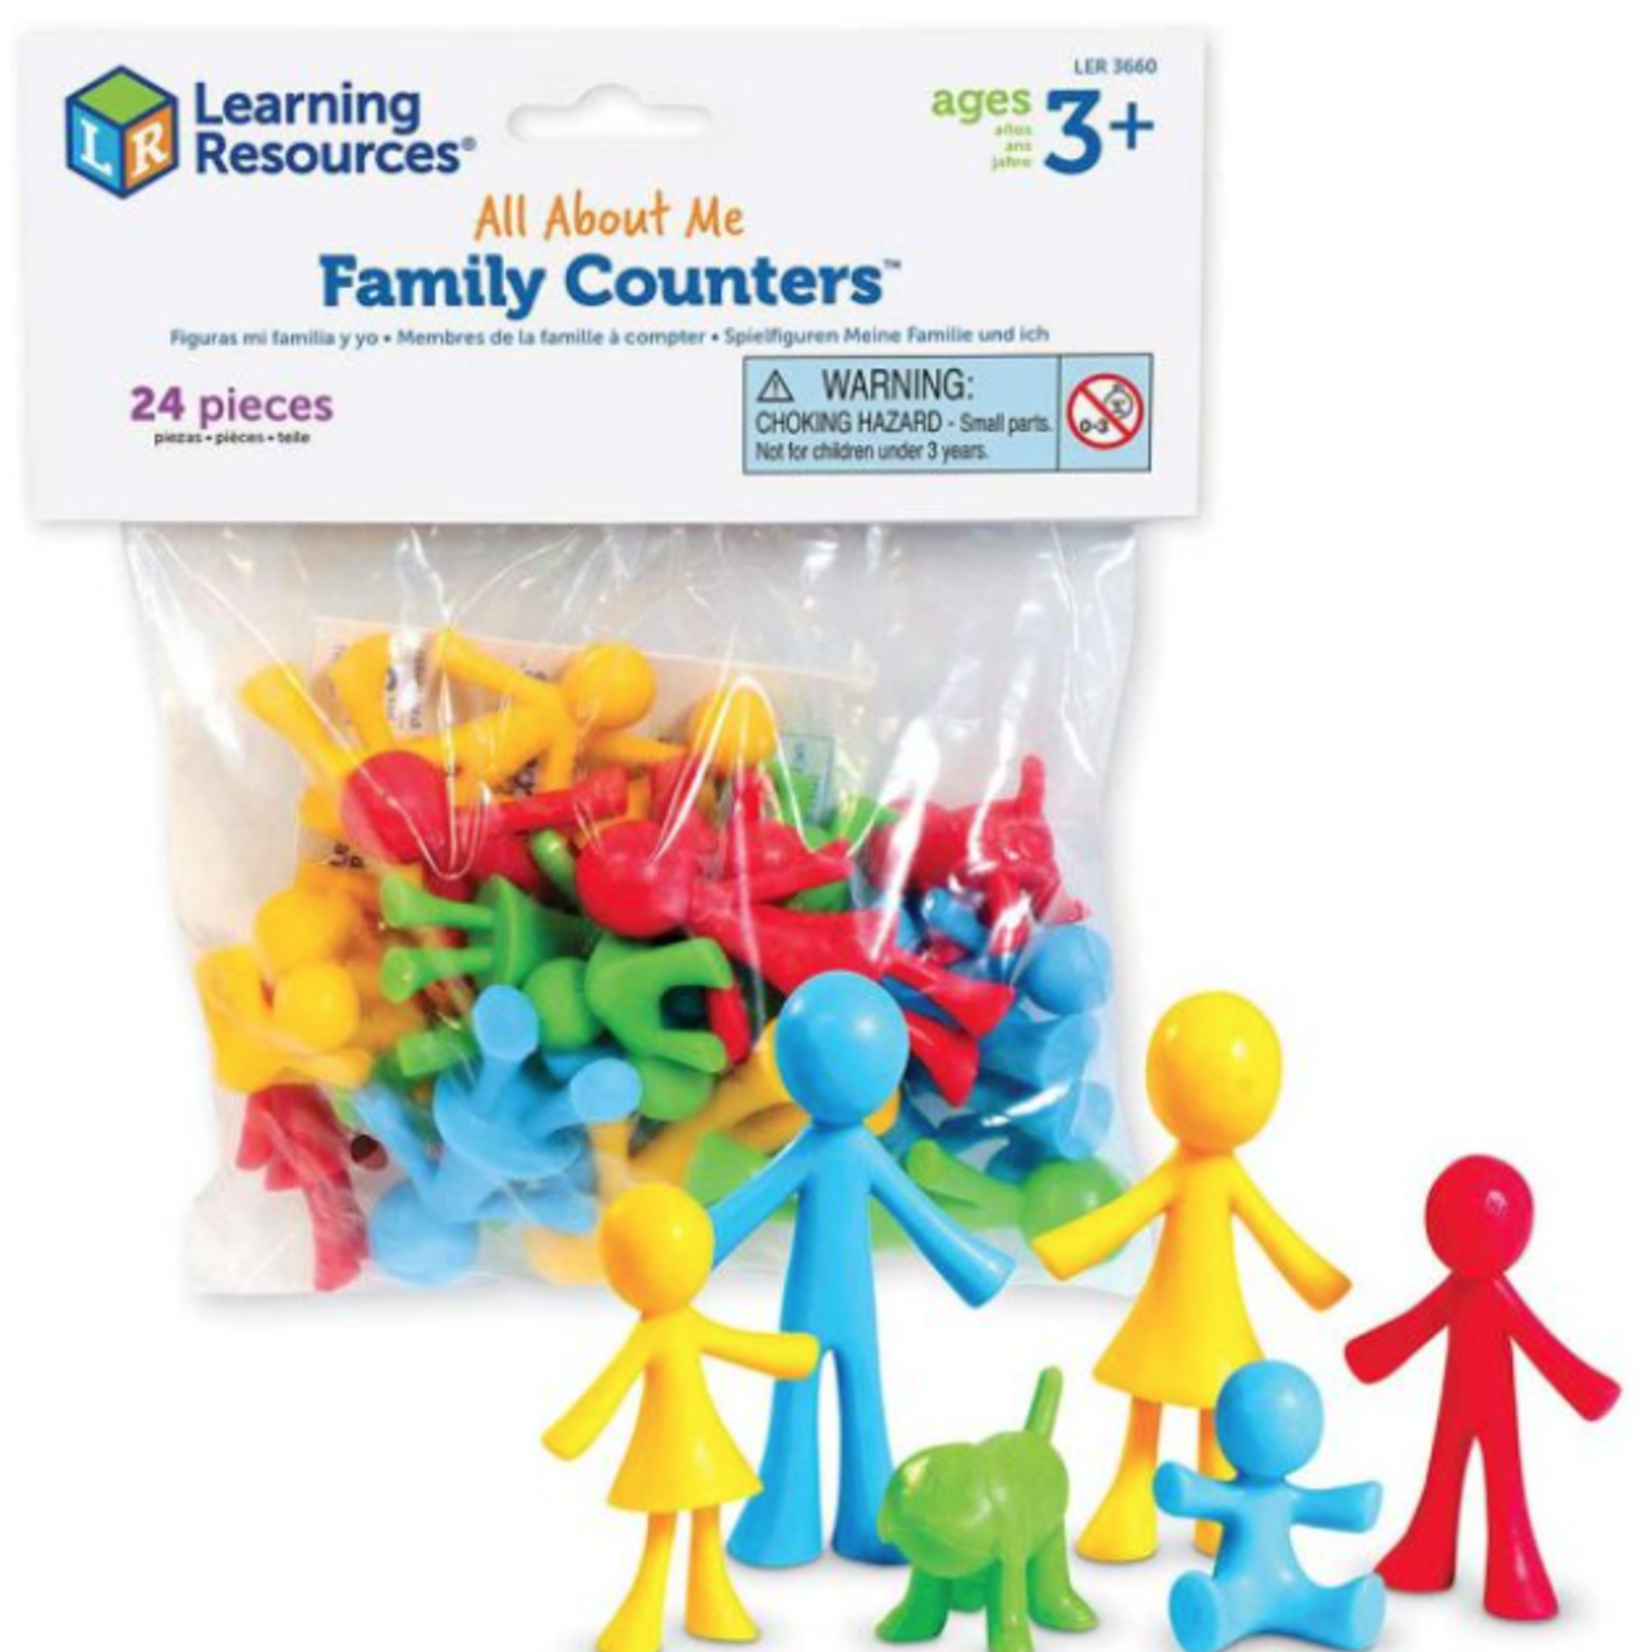 All About Me Family counters